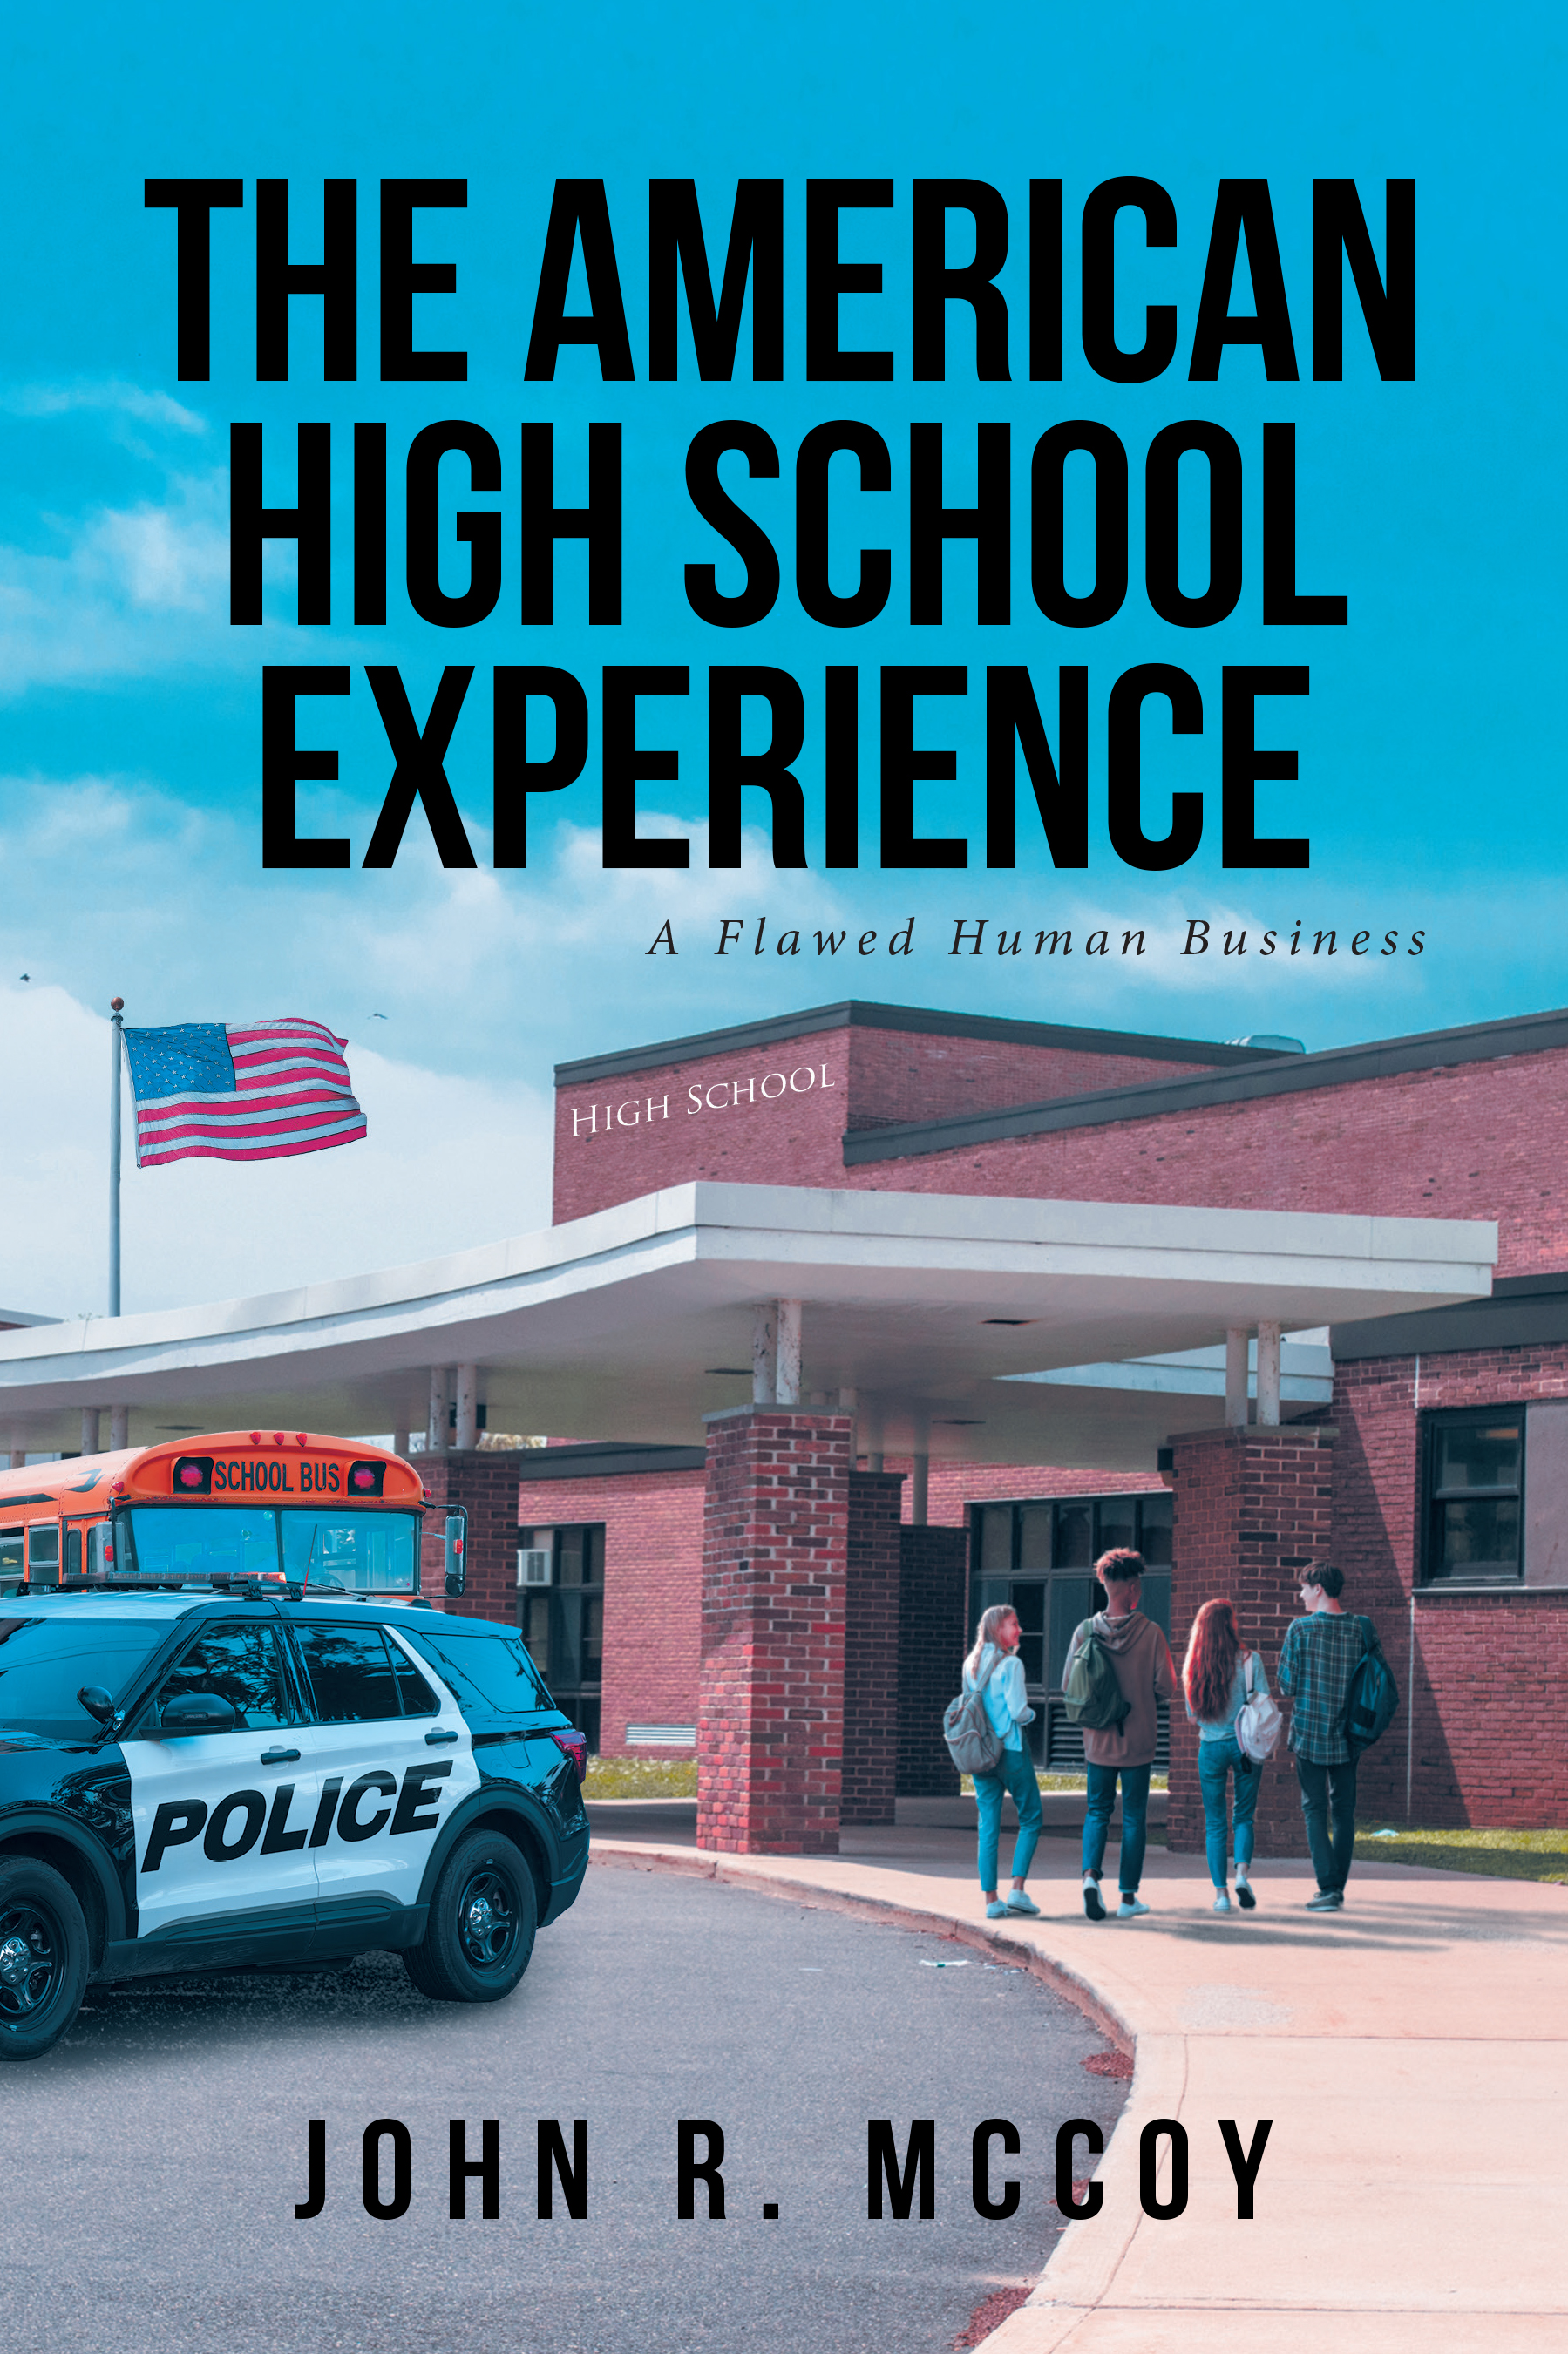 John R. McCoy’s New Book “The American High School Experience: A Flawed Human Business” Presents a Series of True Stories Surrounding the American High School Experience